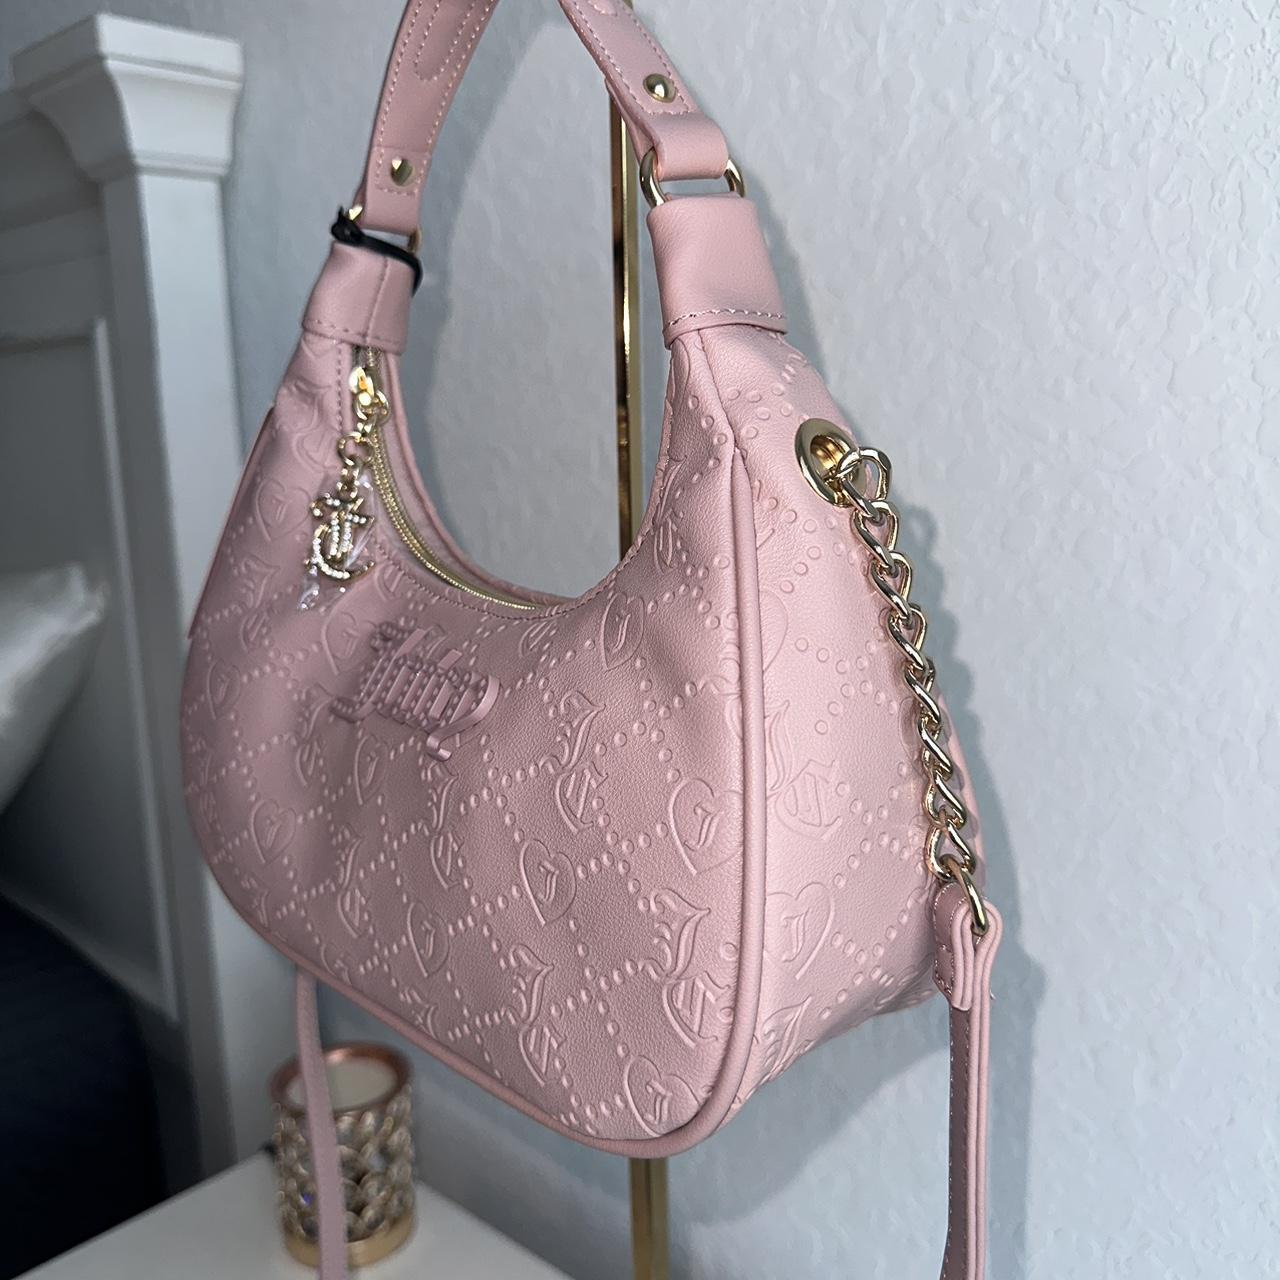 Juicy Couture Pink Crossbody Brand new with tags - Depop